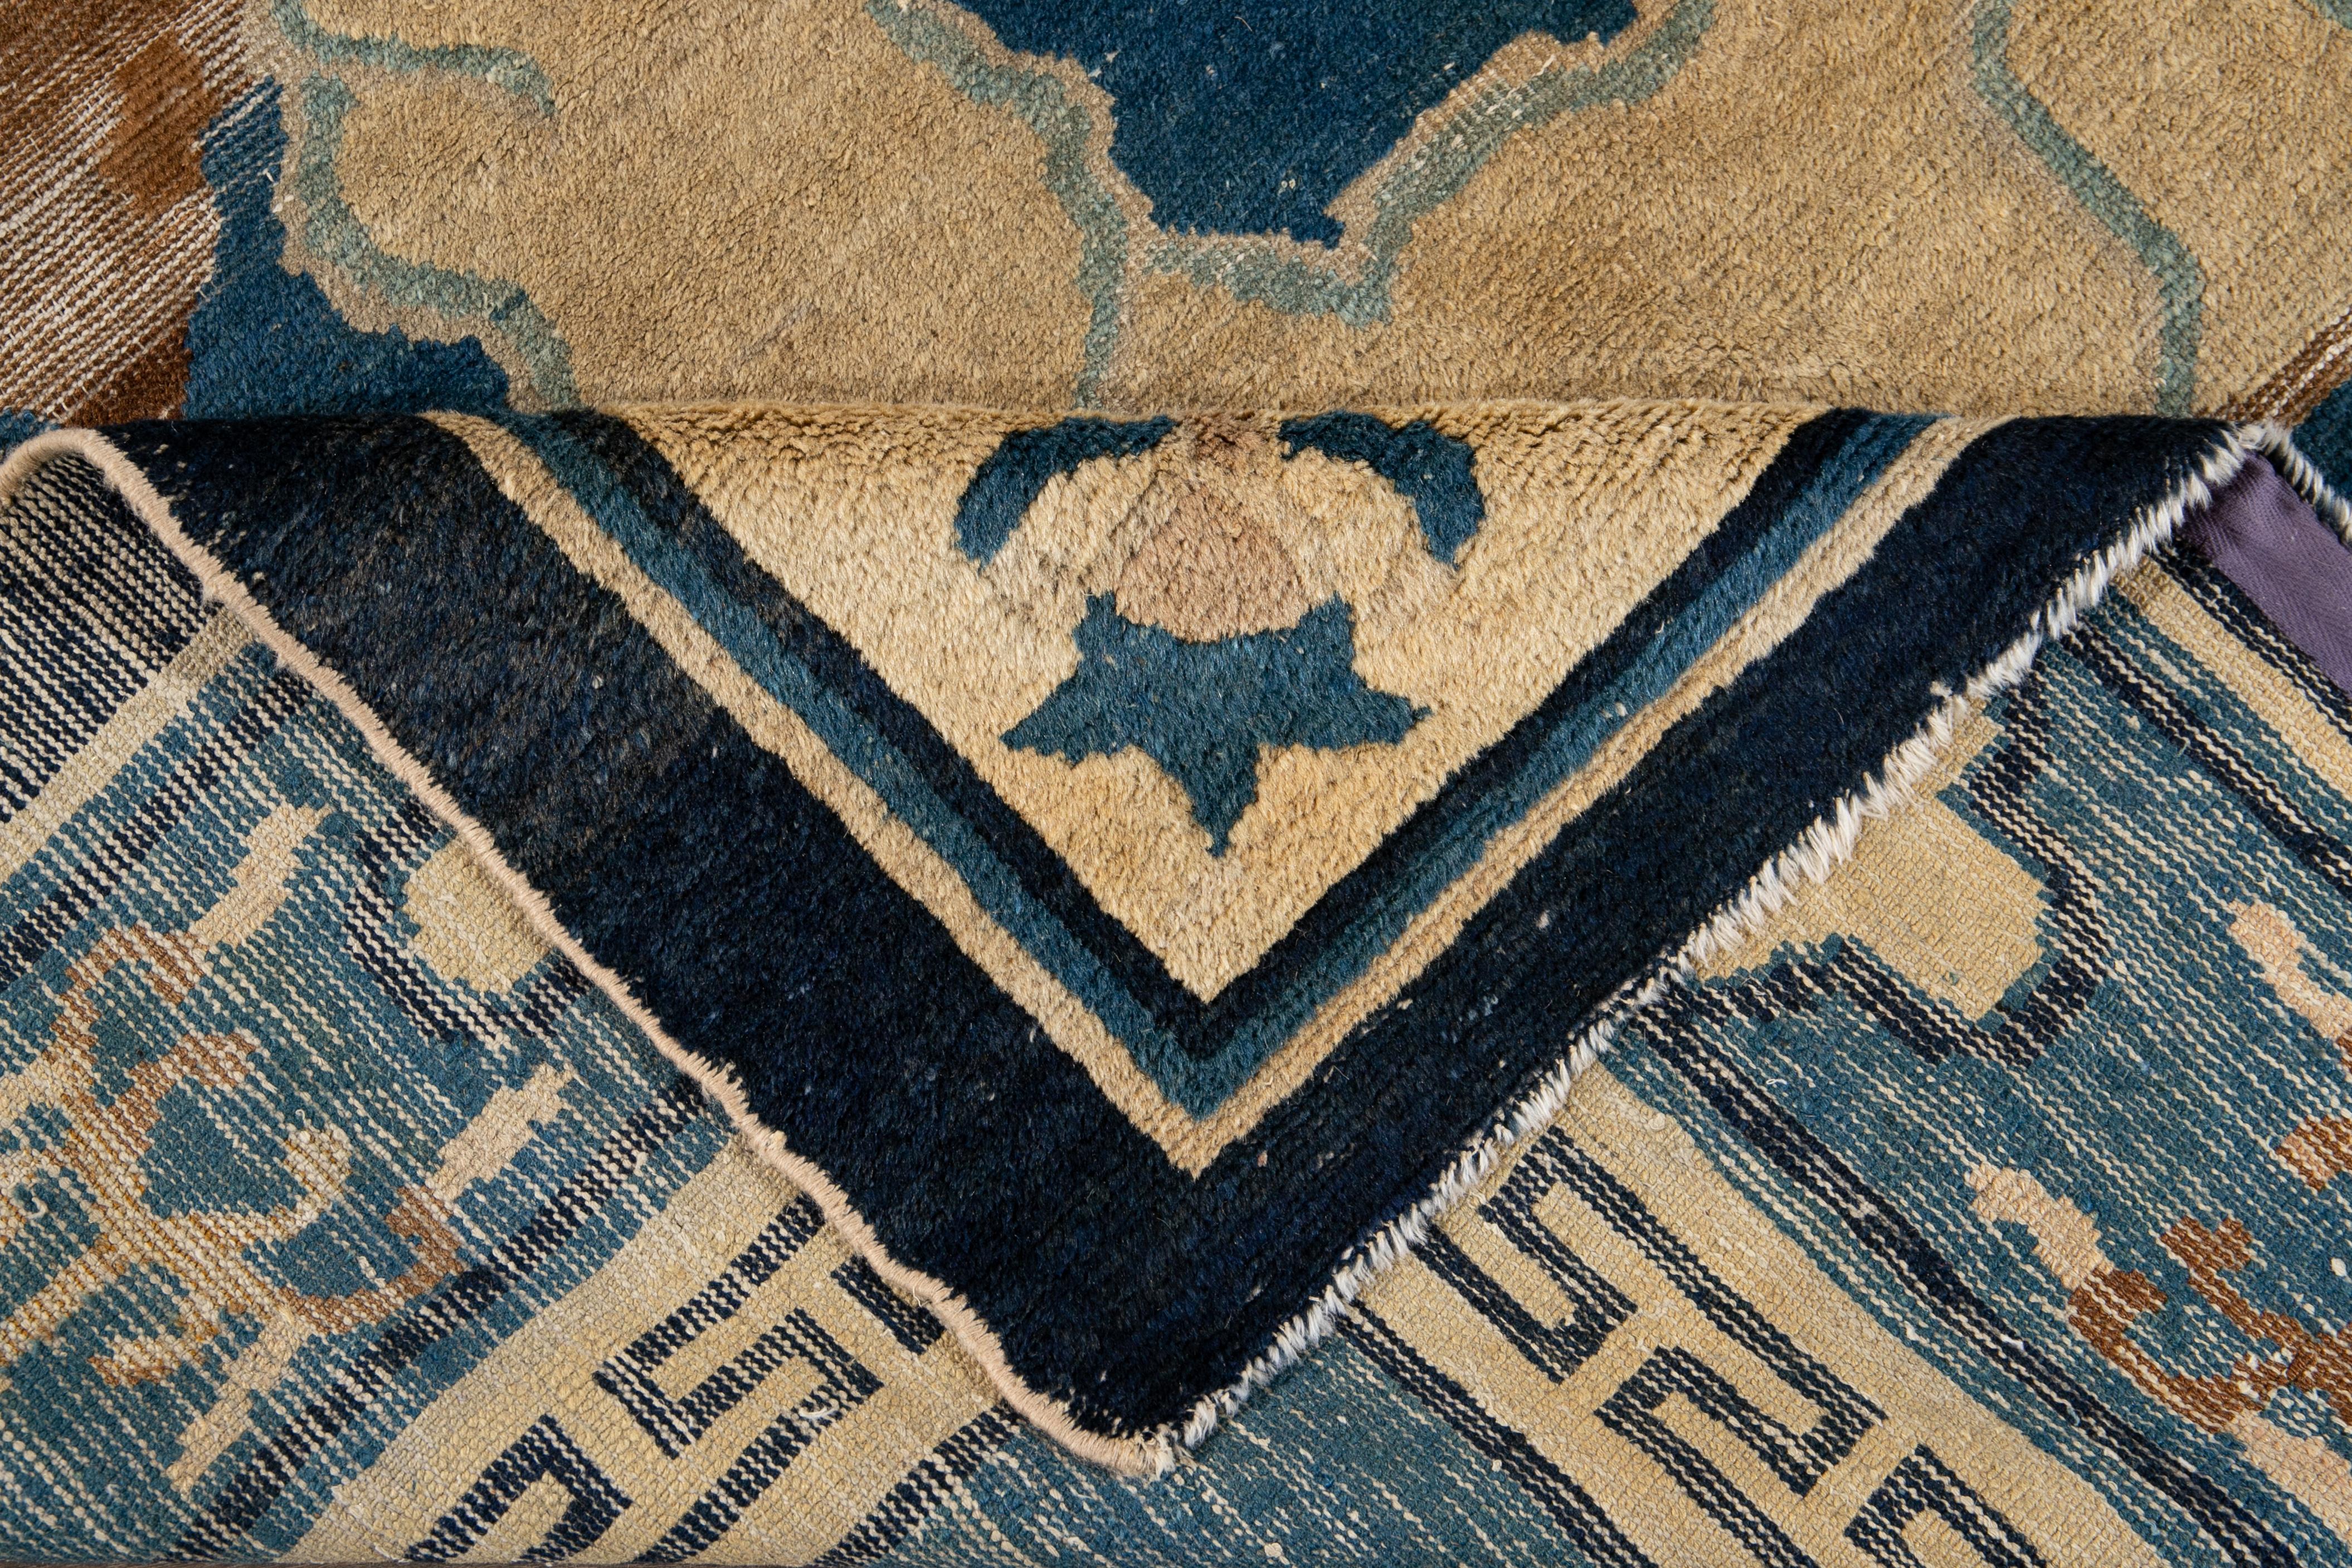 Beautiful antique Chinese Peking rug, hand knotted wool with a blue field, and beige accents in a subtle all-over Classic Chinese art design.

This rug measures: 7'8